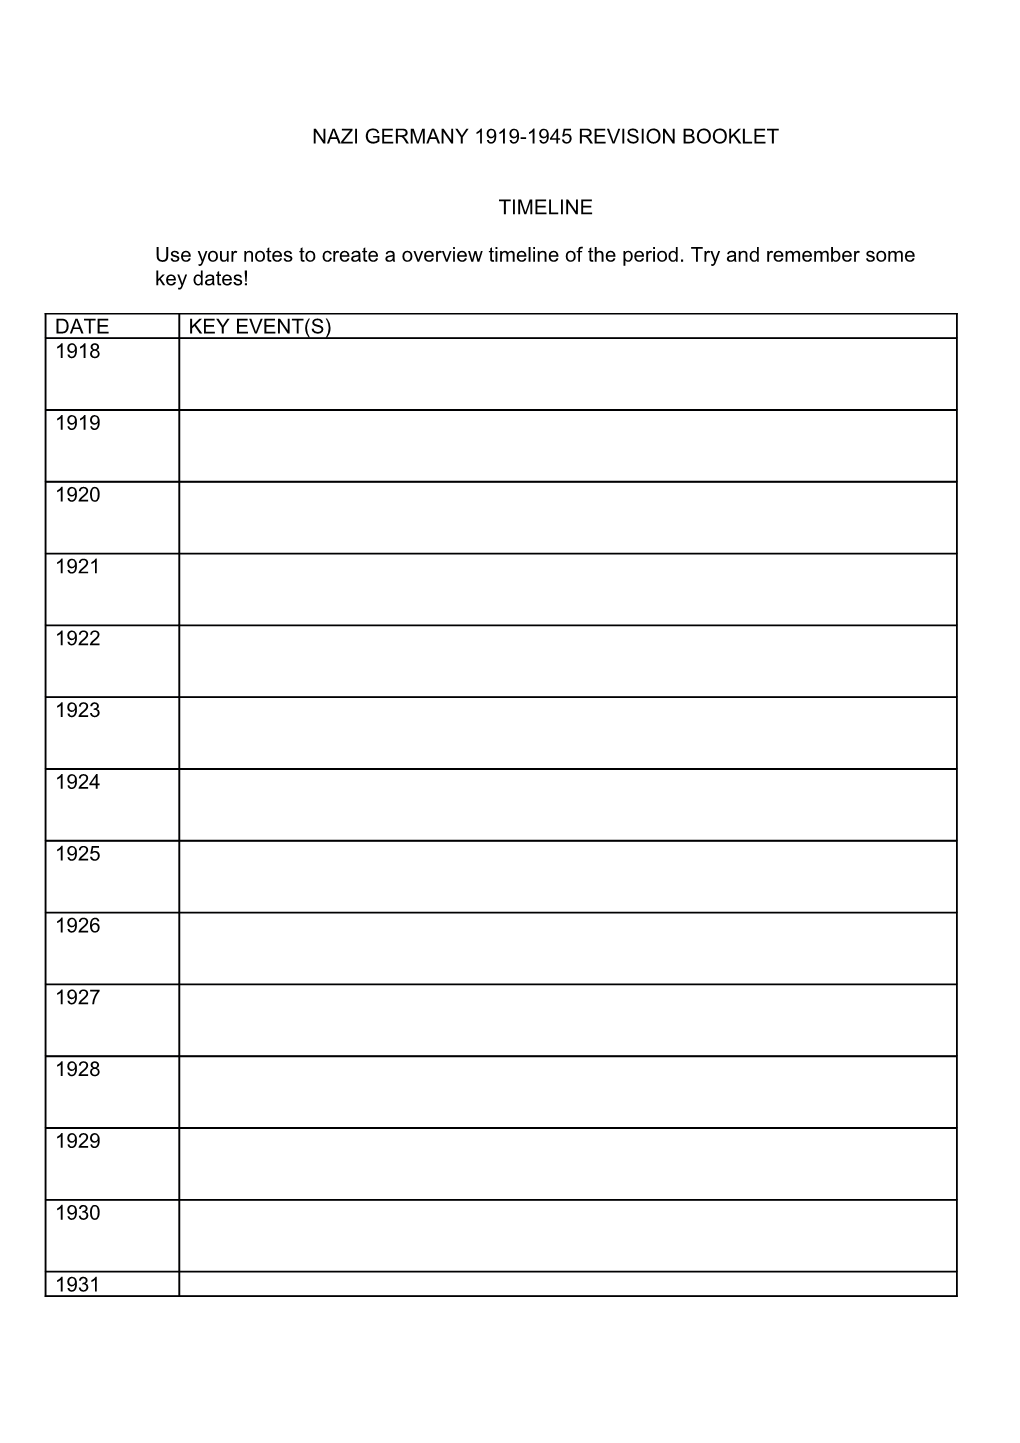 Nazi Germany 1919-1945 Revision Booklet